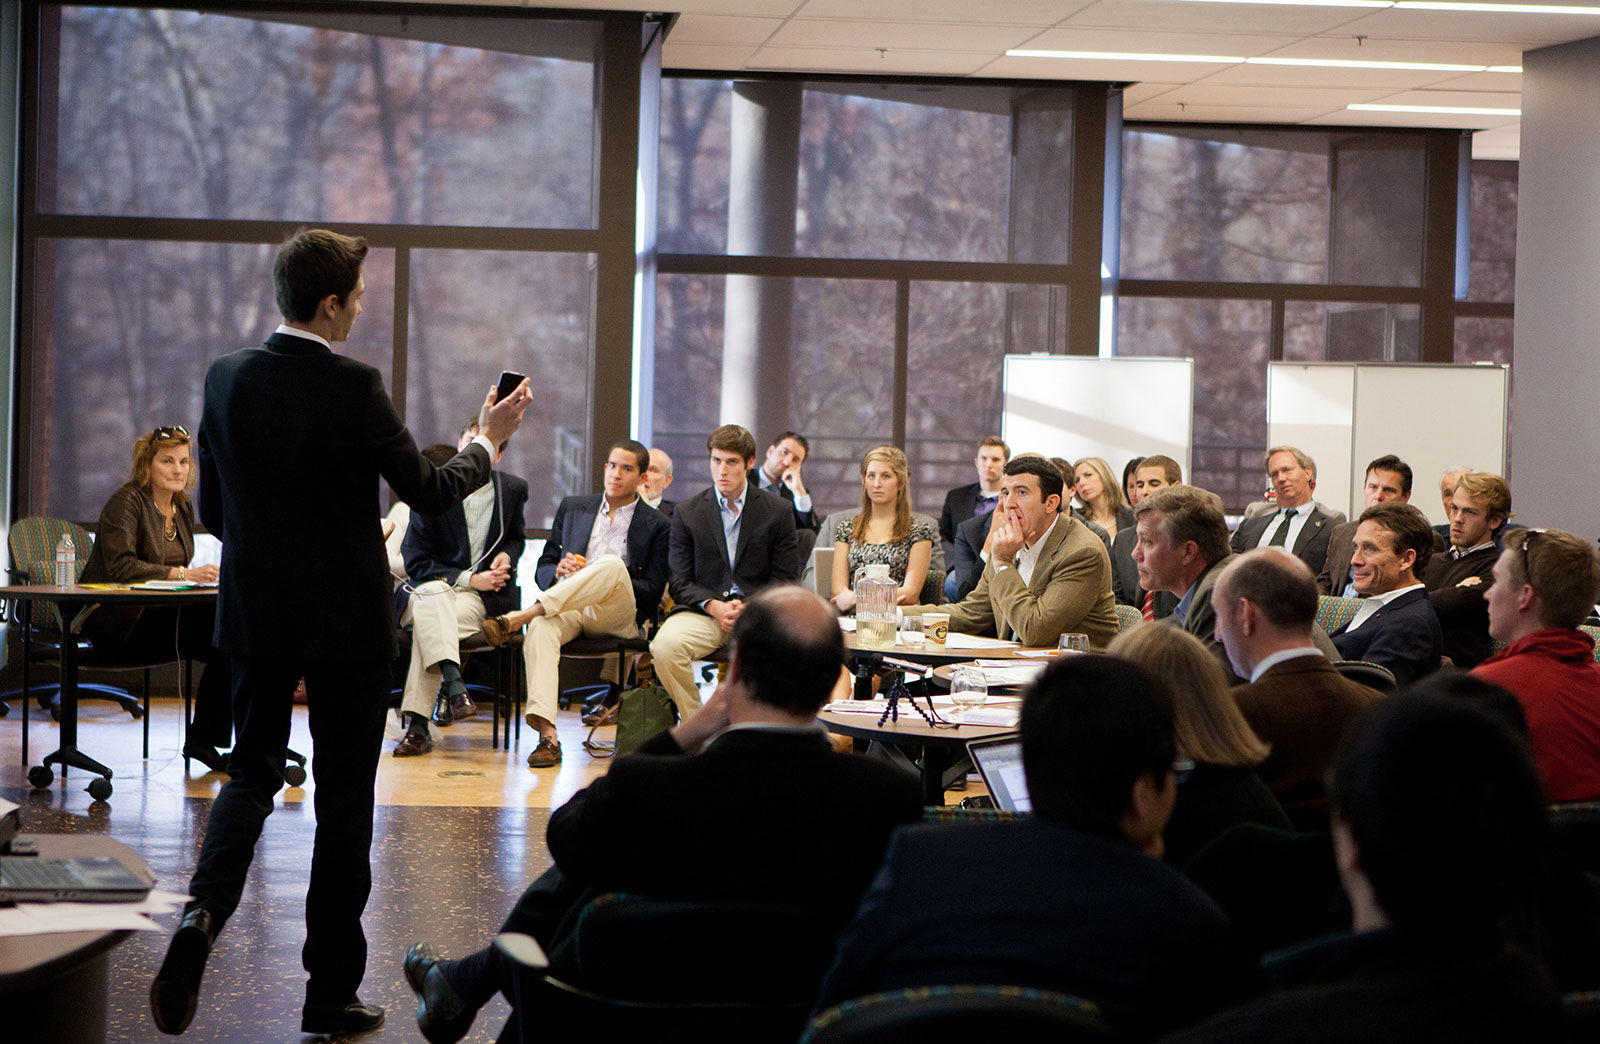 Joseph M. Linzon  presenting during a competition to an audience and judges